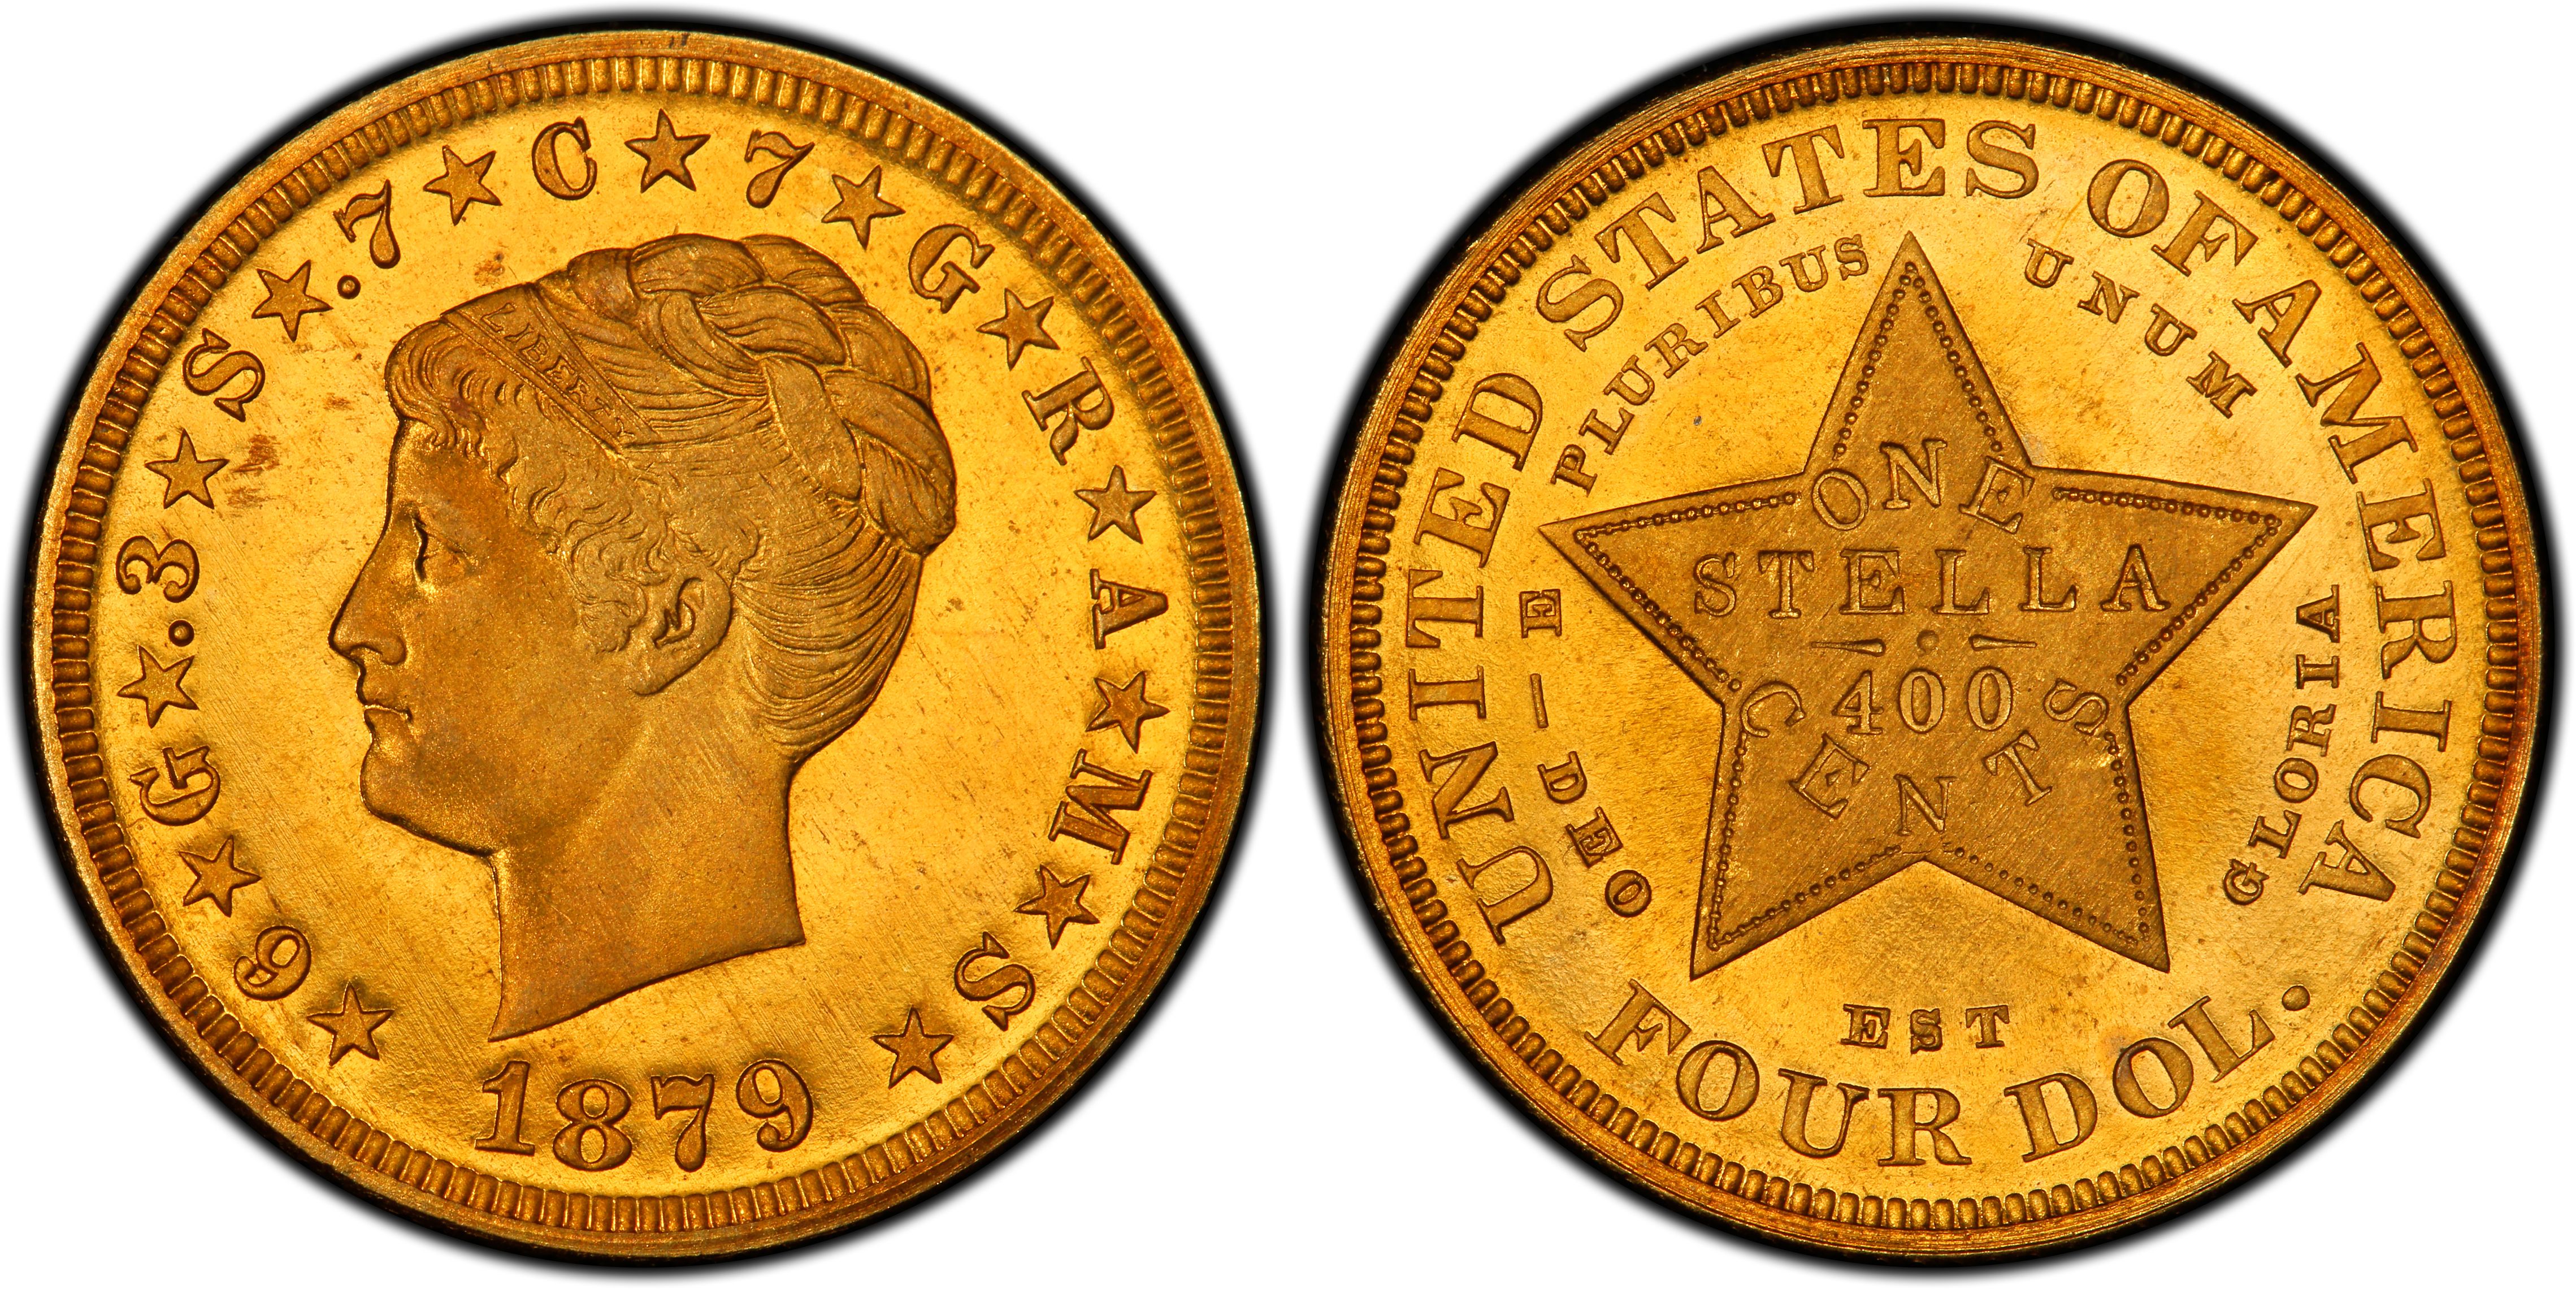 Value of 1880 Stella Coiled Hair $4 Gold